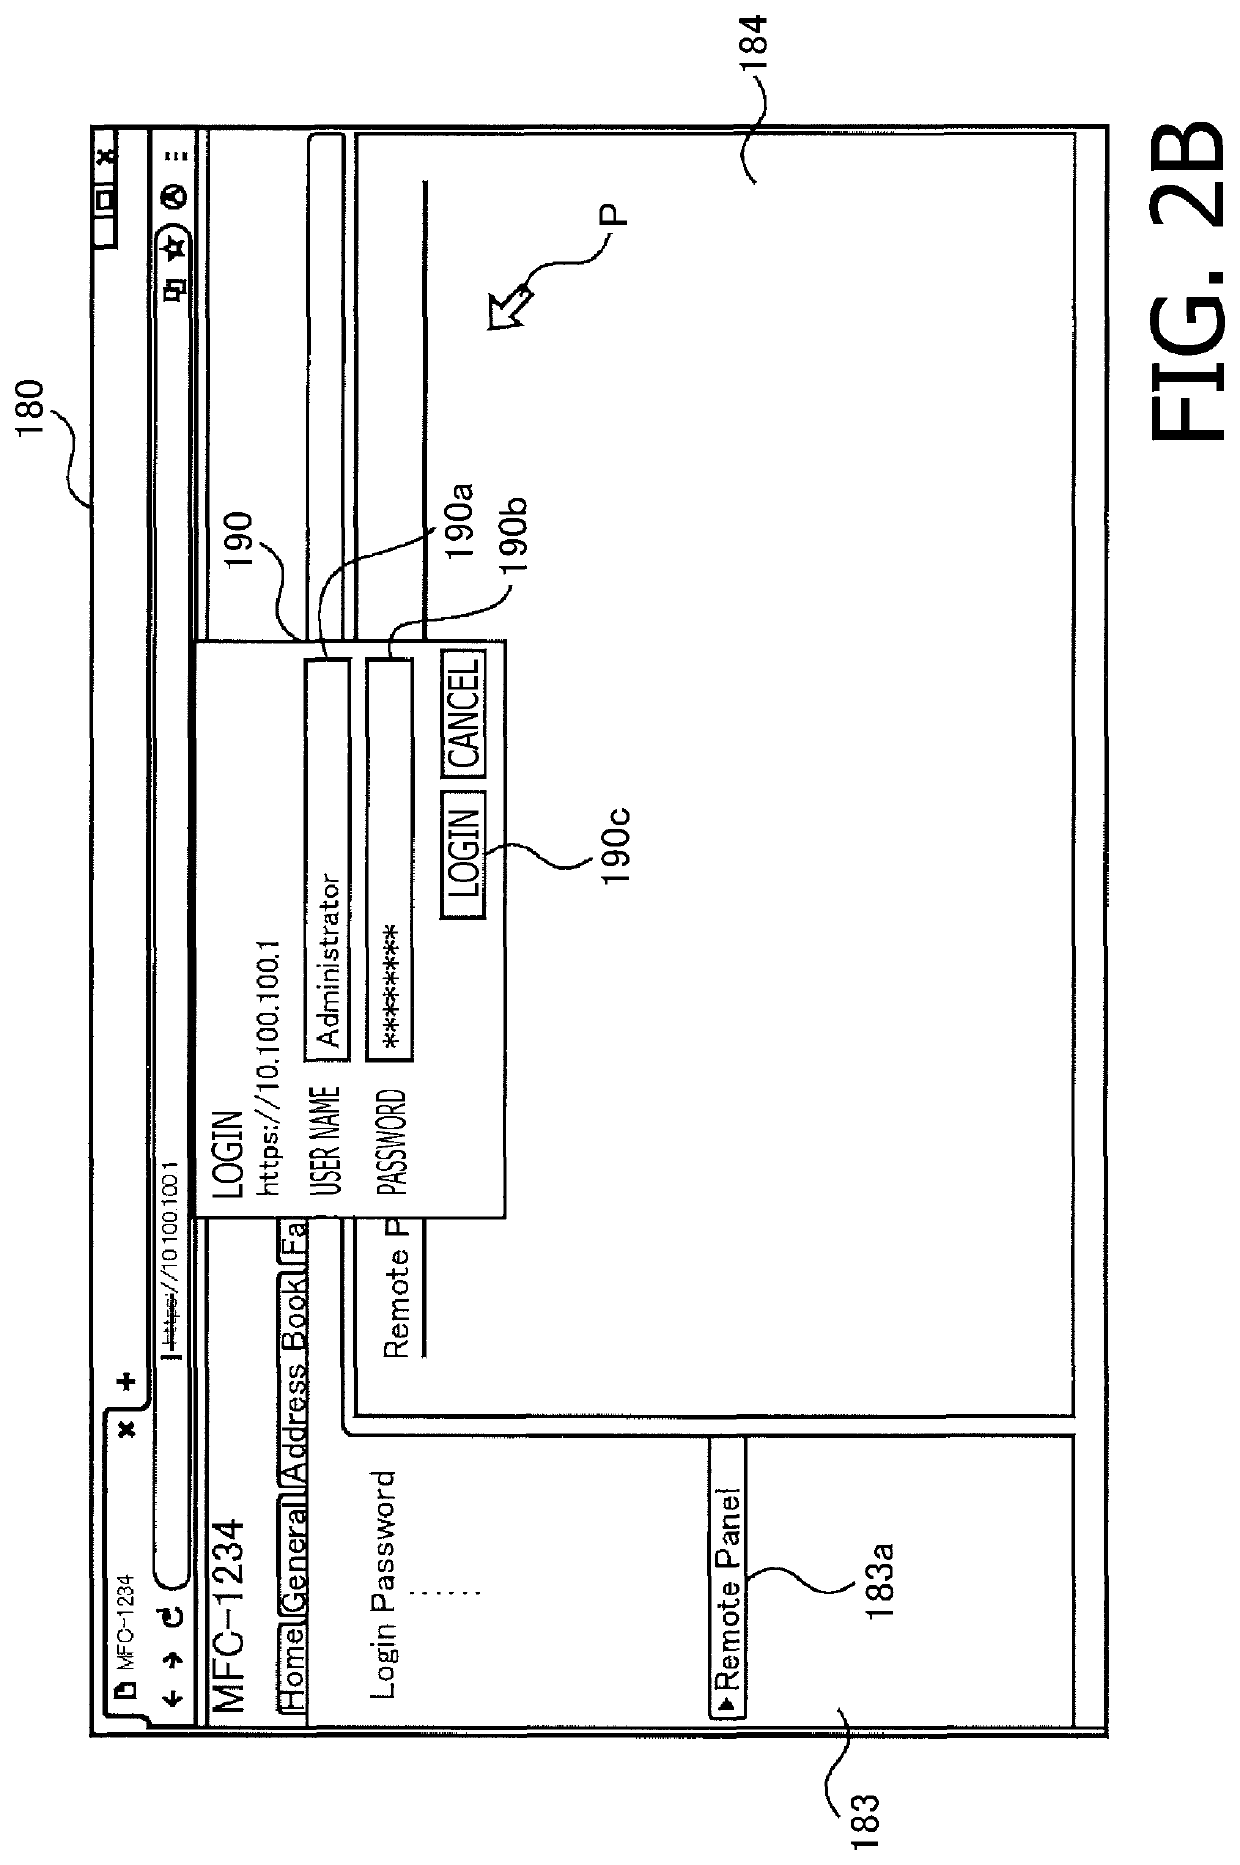 Image forming apparatus, method, and computer-readable medium for reducing processing load to display animation during remote control